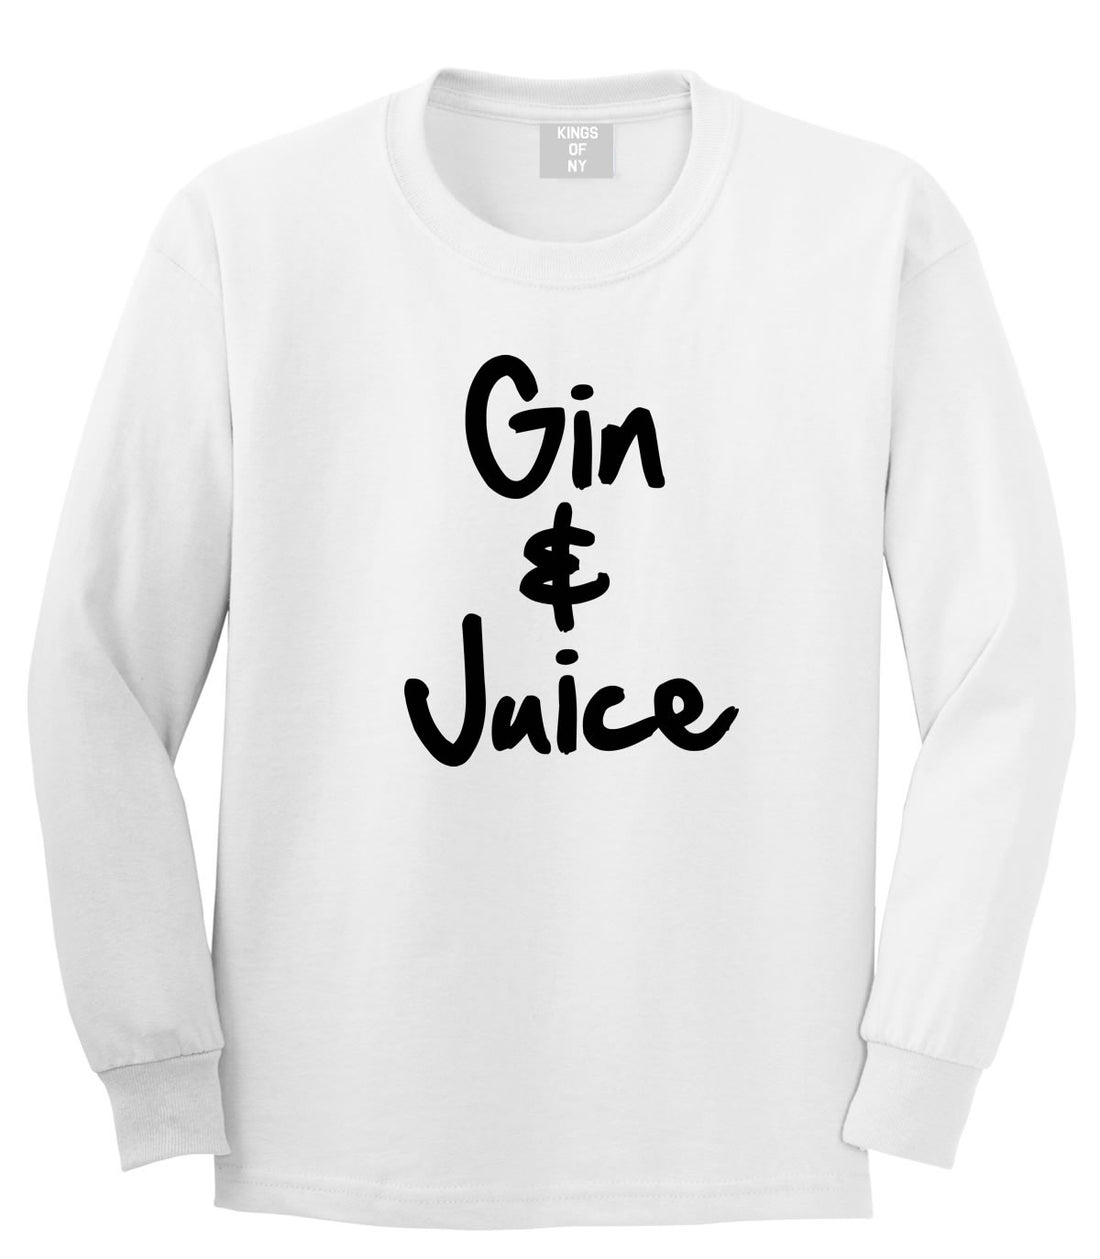 Kings Of NY Gin and Juice Long Sleeve T-Shirt in White